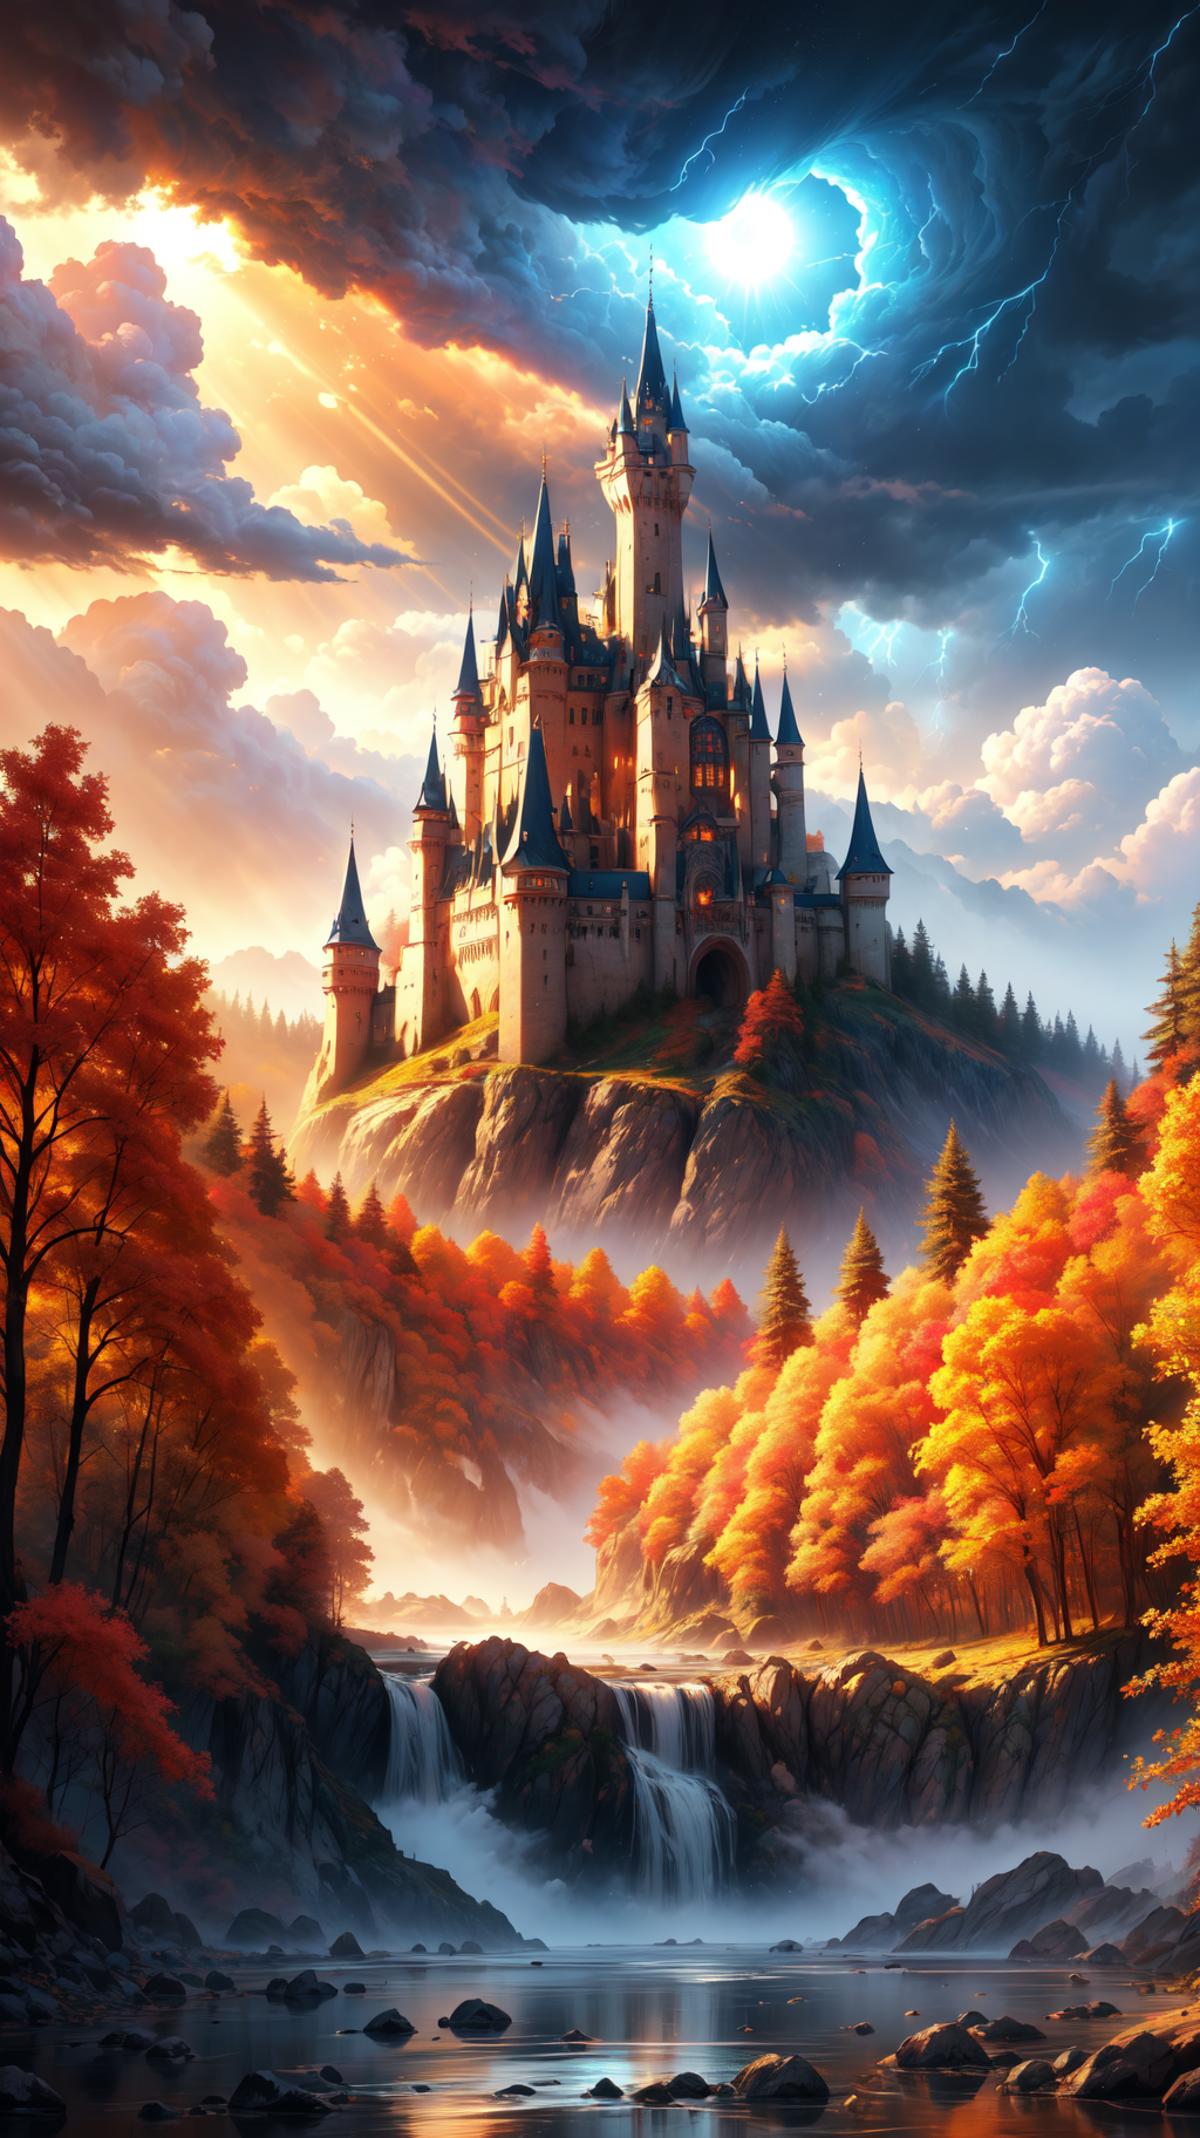 A Castle in the Clouds: A Fantasy Painting of a Castle with a Sunburst Background